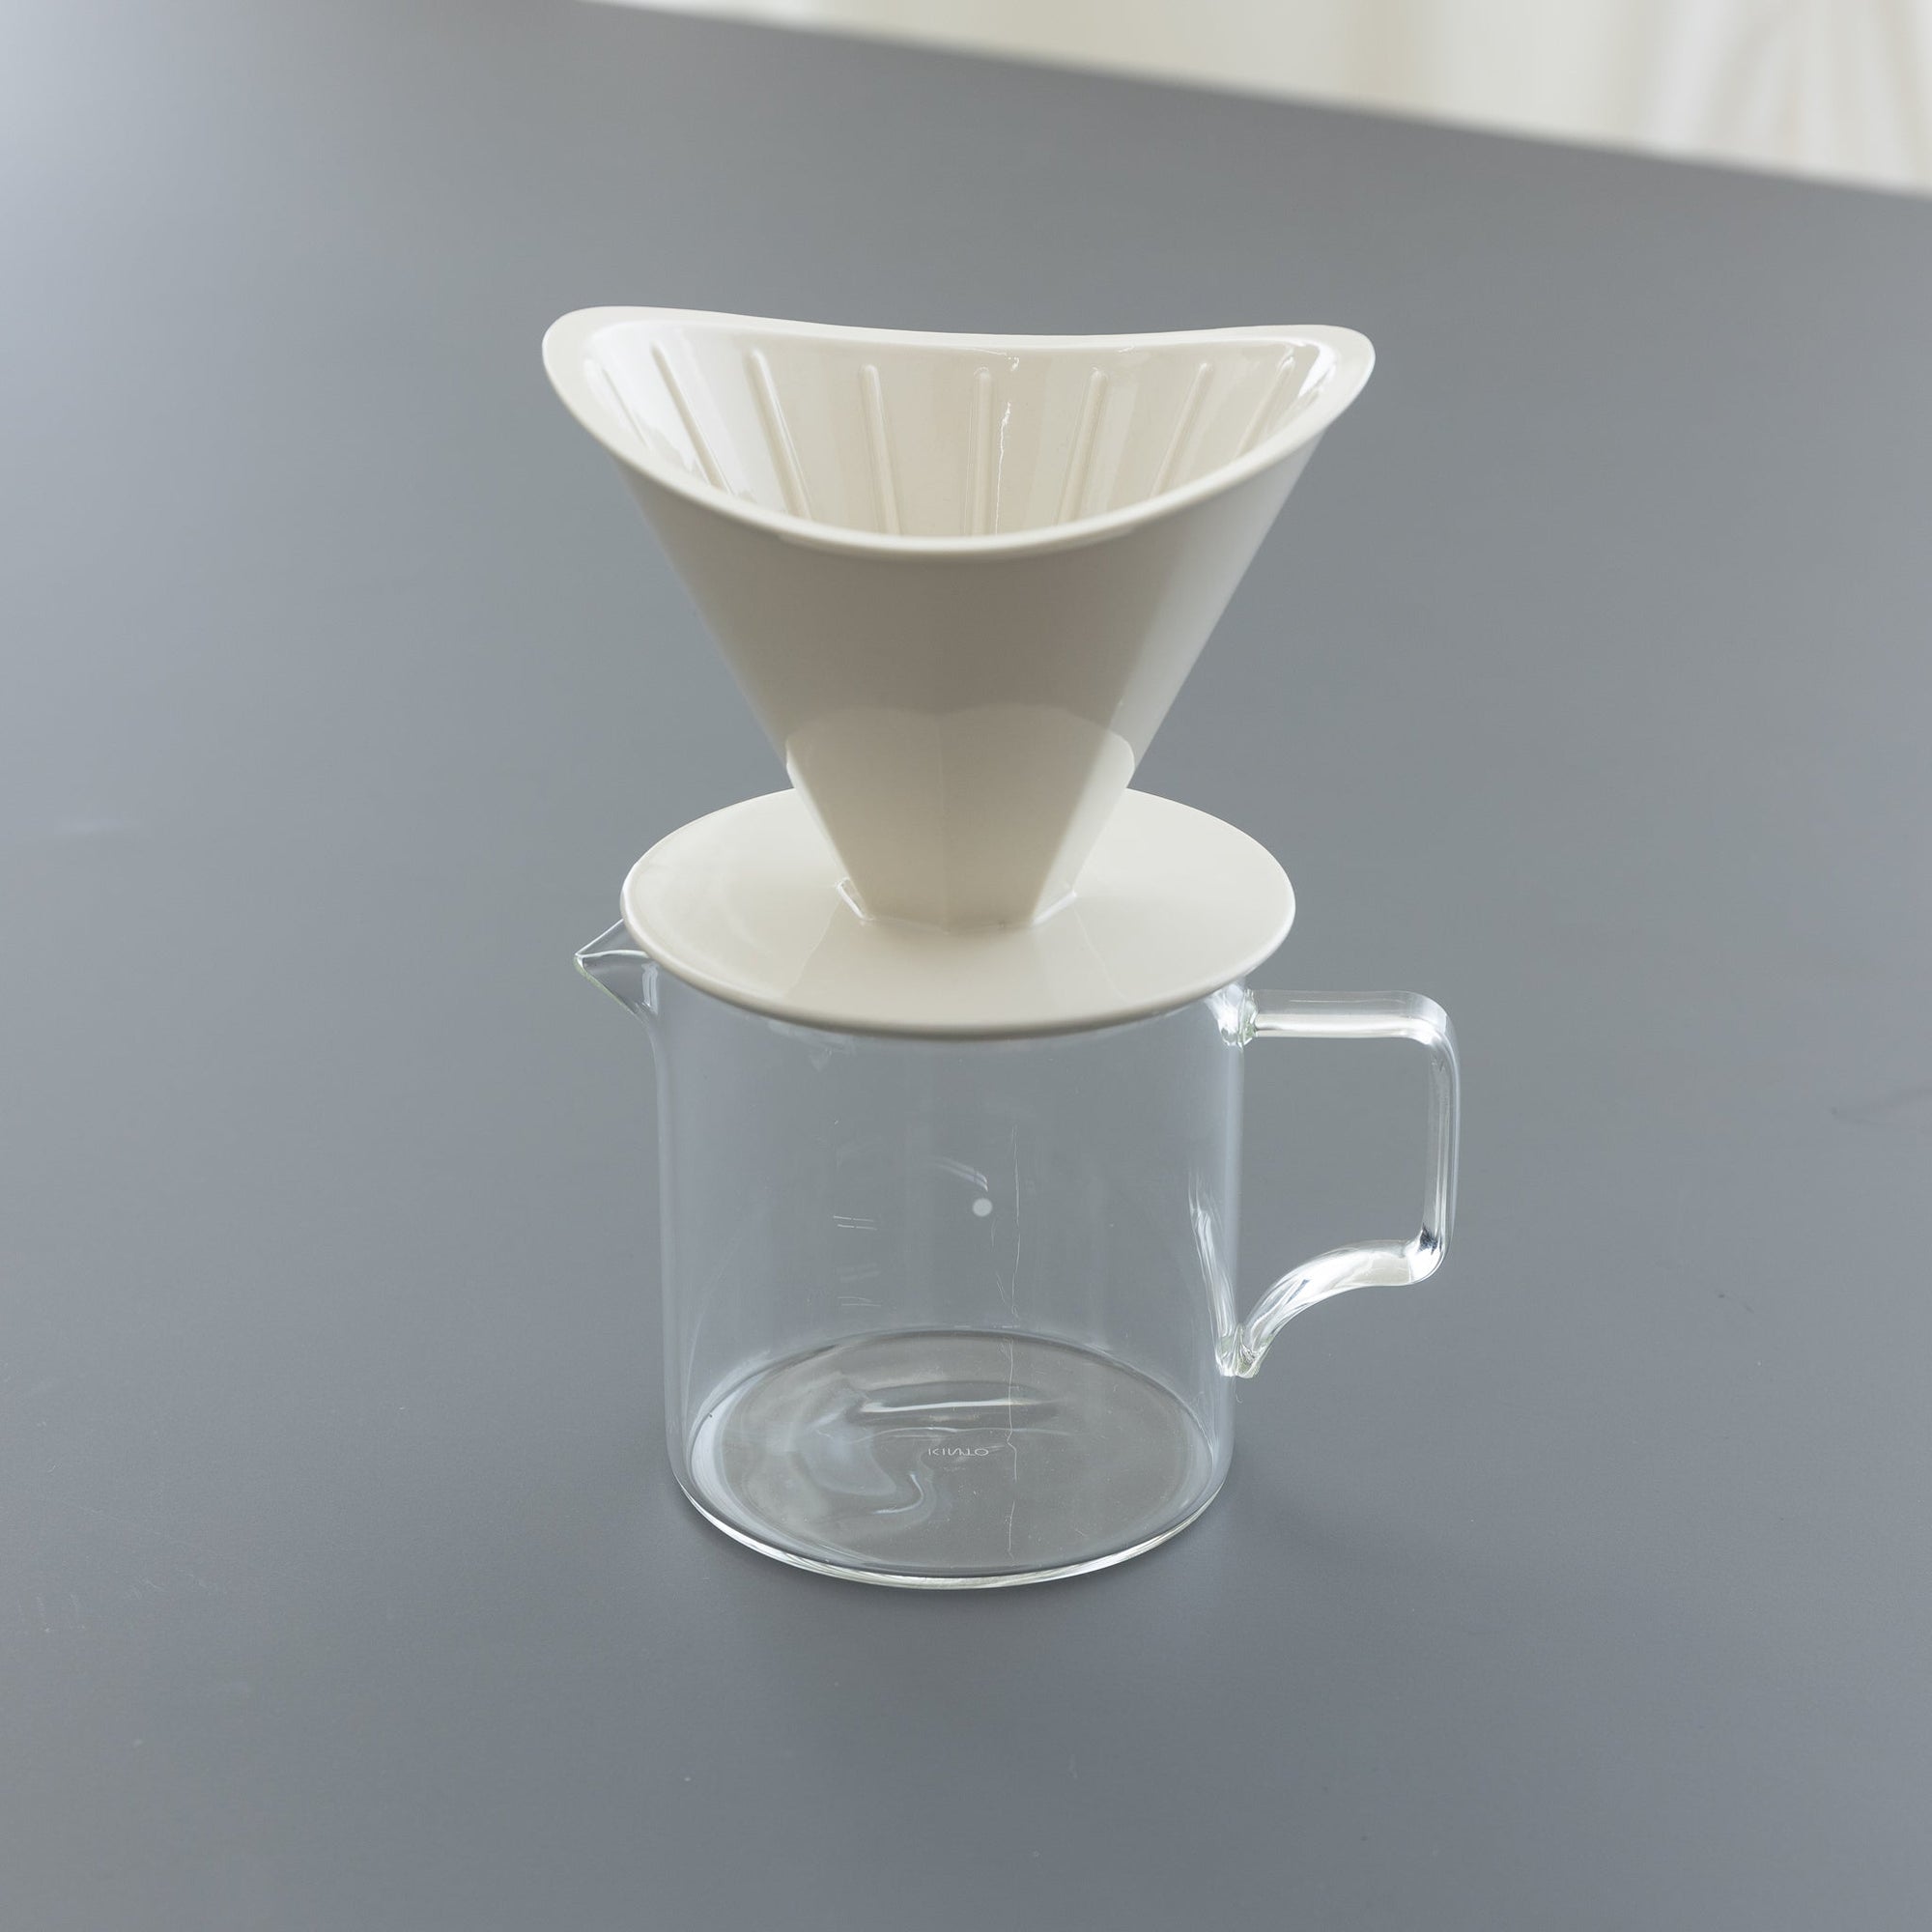 KINTO OCT Coffee Jug - 2 Cups | Tortoise General Store